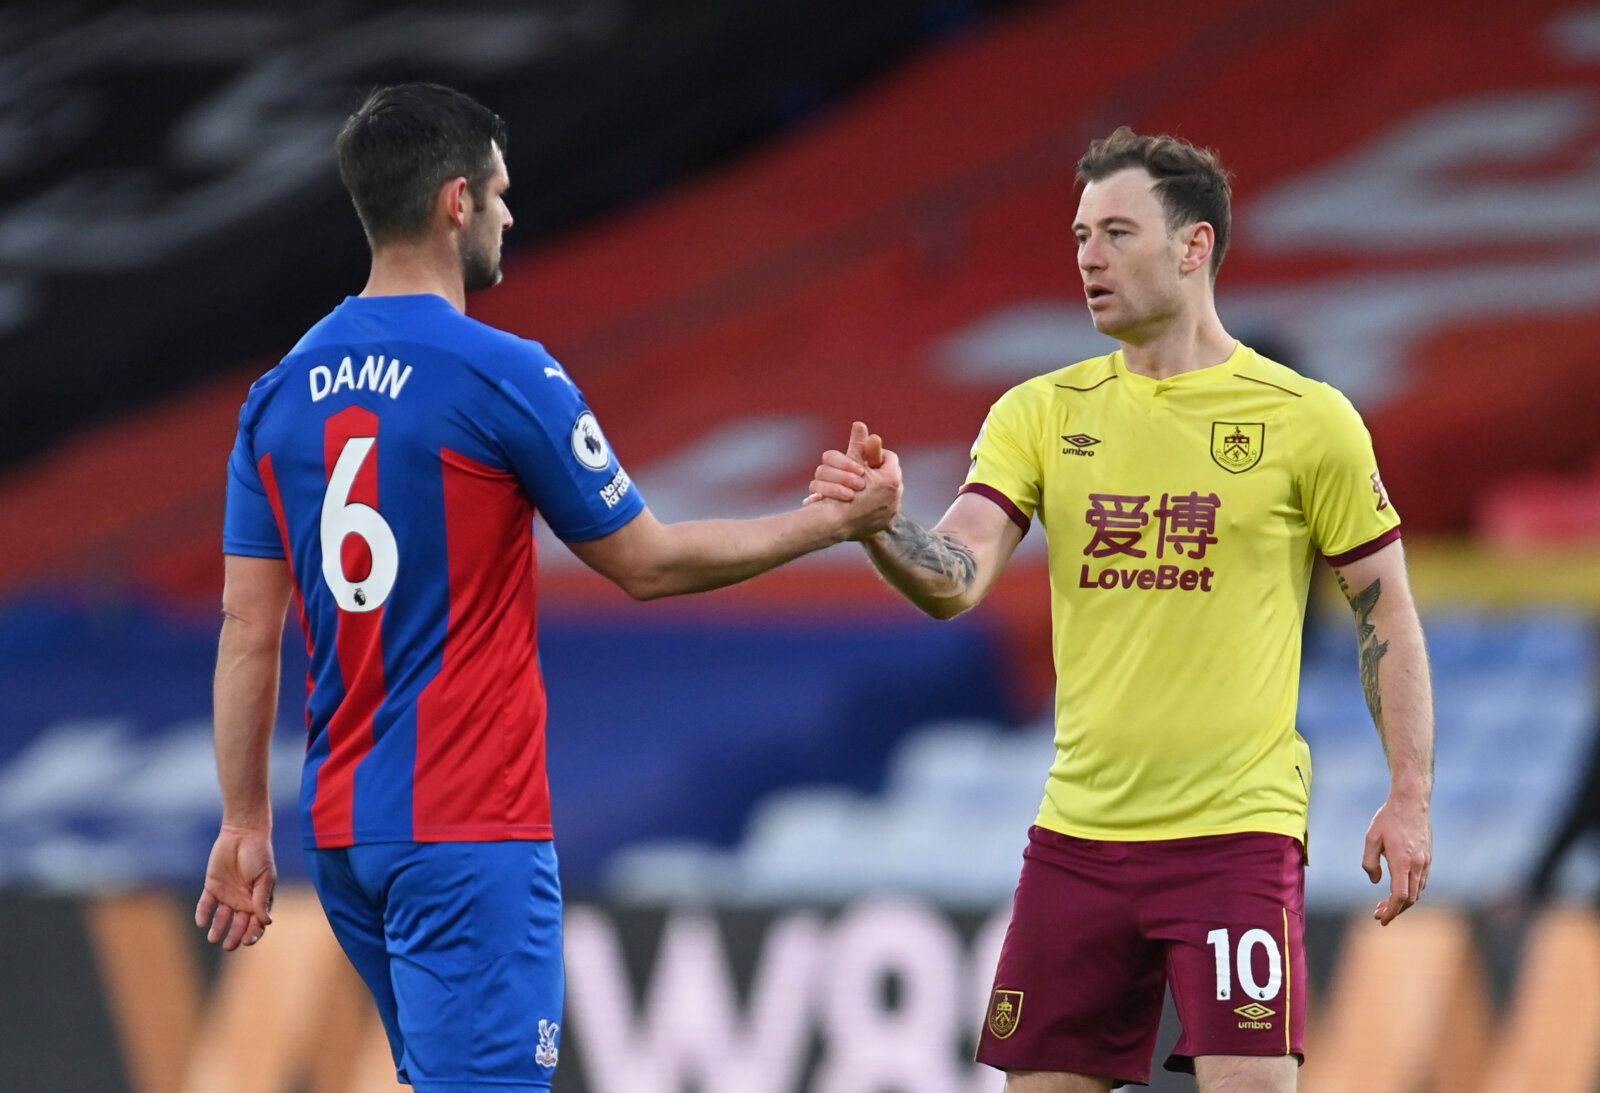 Soccer Football - Premier League - Crystal Palace v Burnley - Selhurst Park, London, Britain - February 13, 2021 Burnley's Ashley Barnes shakes hands with Crystal Palace's Scott Dann after the match Pool via REUTERS/Justin Setterfield EDITORIAL USE ONLY. No use with unauthorized audio, video, data, fixture lists, club/league logos or 'live' services. Online in-match use limited to 75 images, no video emulation. No use in betting, games or single club /league/player publications.  Please contact 